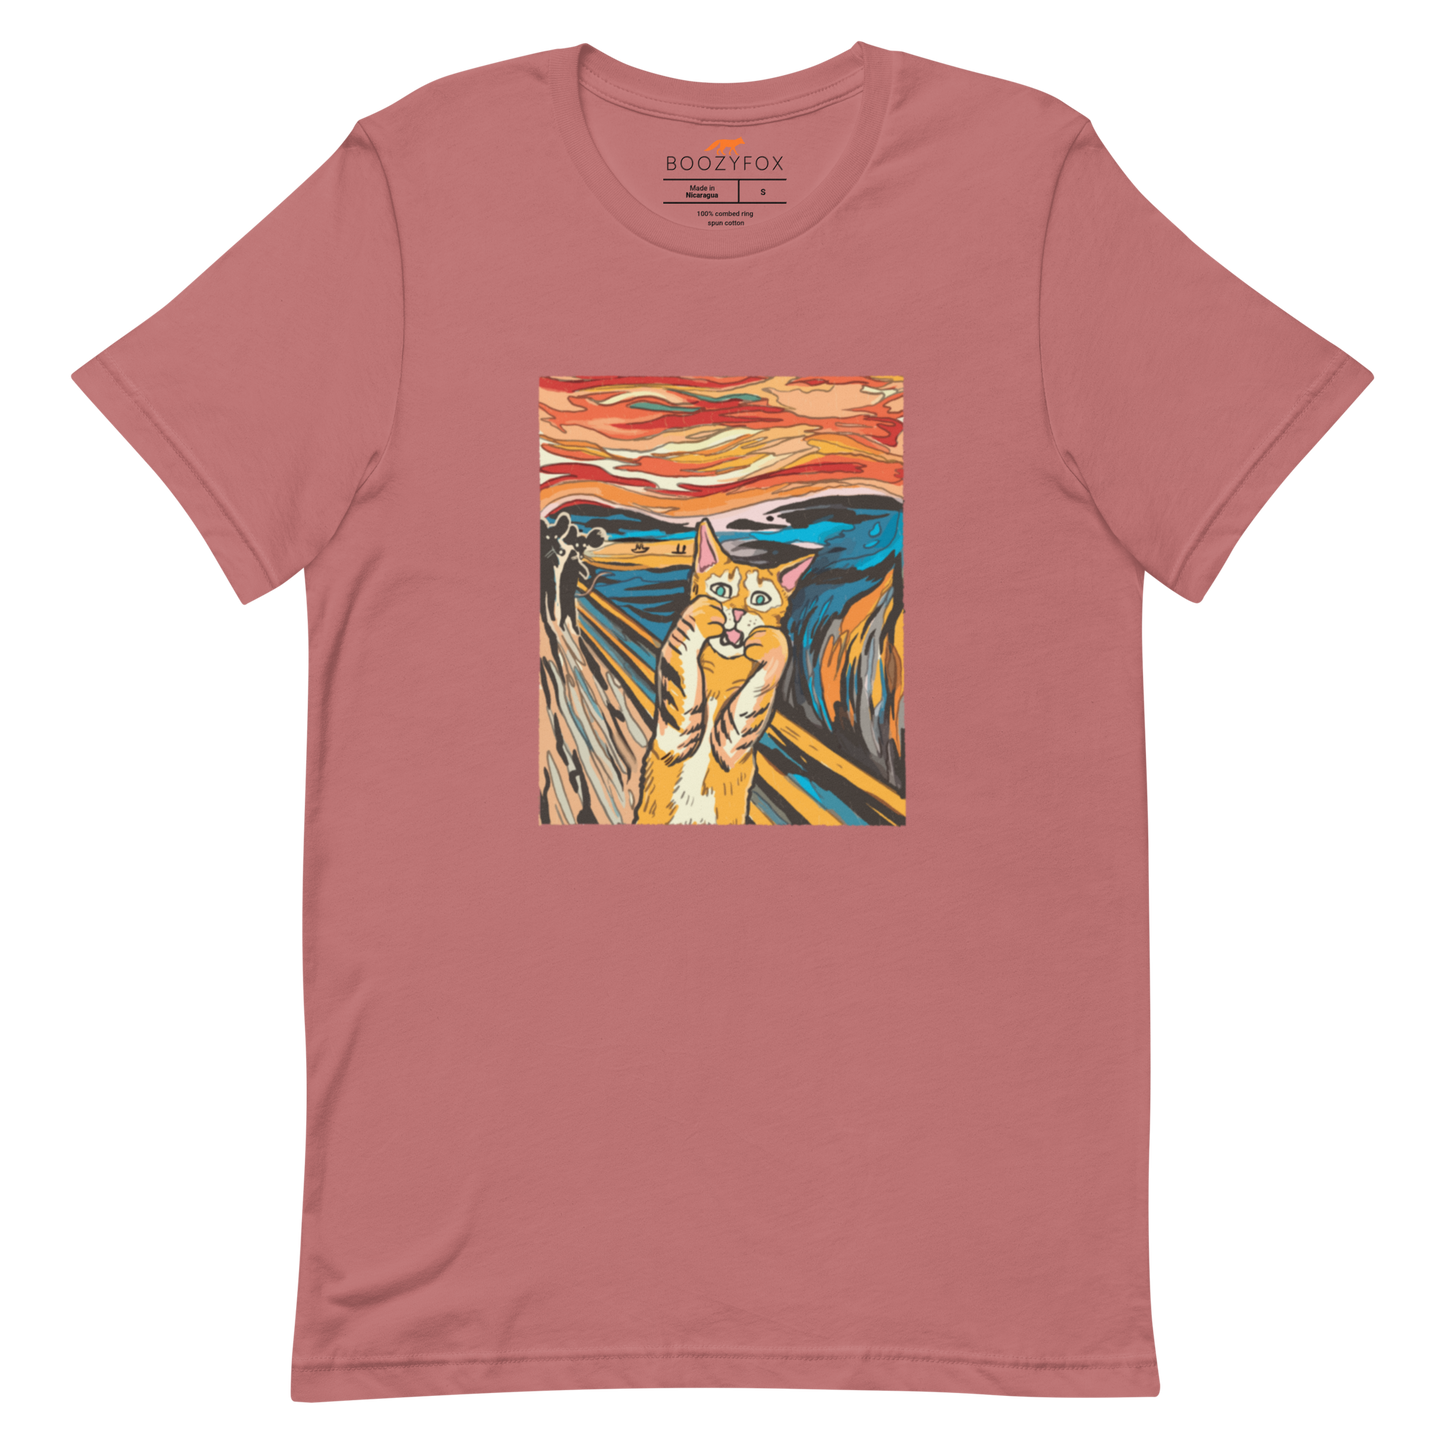 Mauve Premium Screaming Cat T-Shirt showcasing iconic The Screaming Cat graphic on the chest - Funny Graphic Cat Tees - Boozy Fox